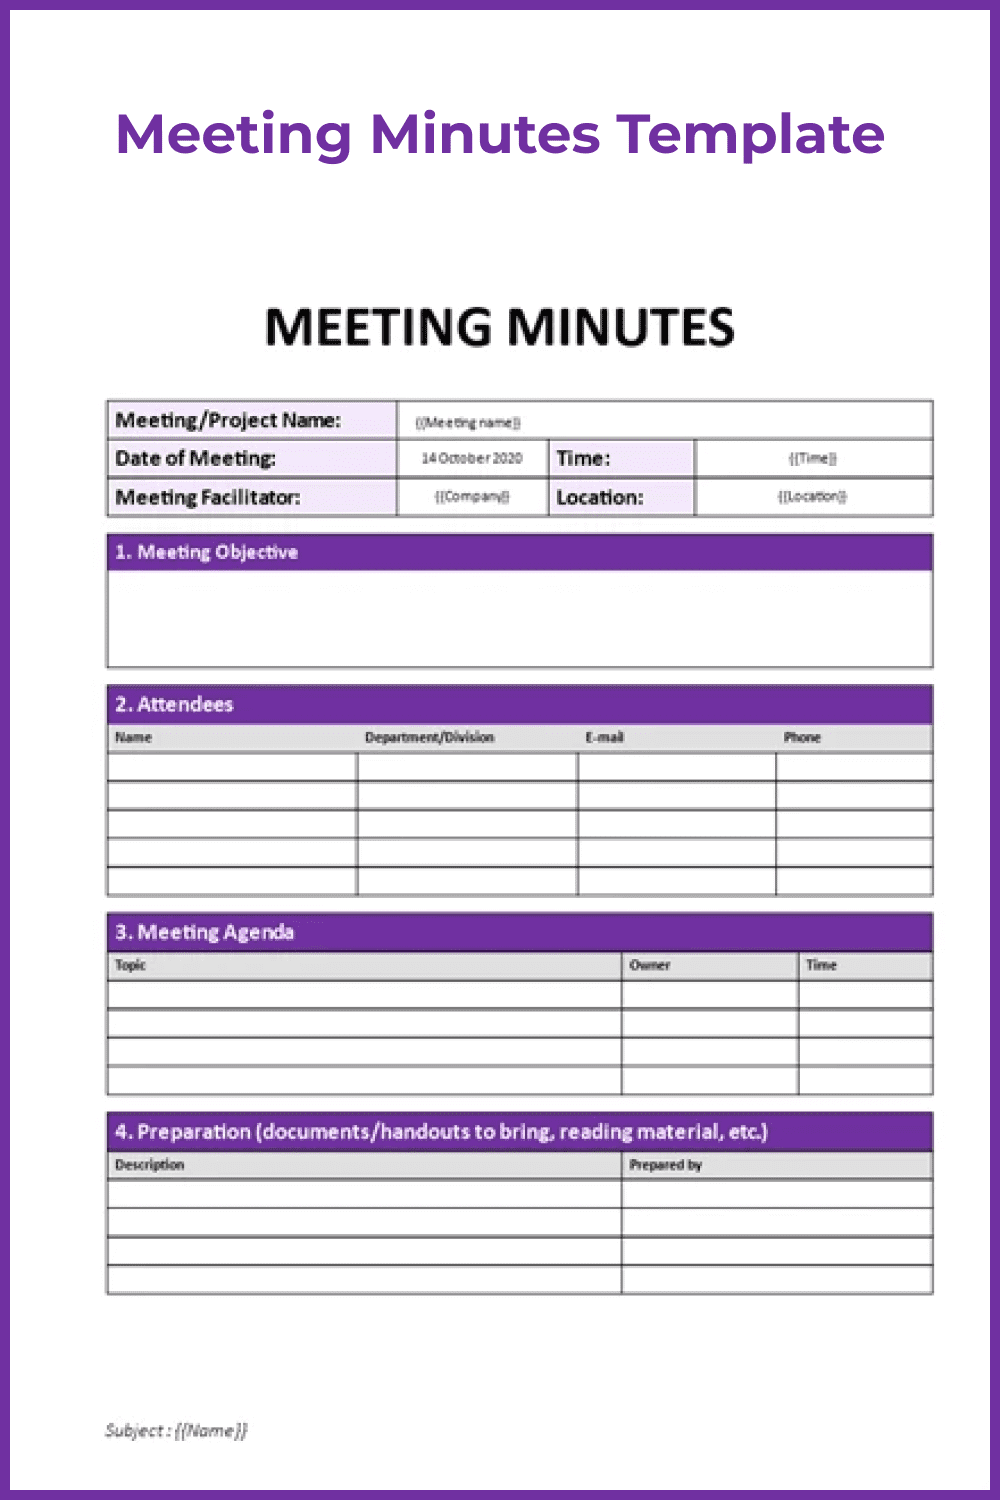 Meeting Minutes Template Free Of Top Free Meeting Minutes Templates